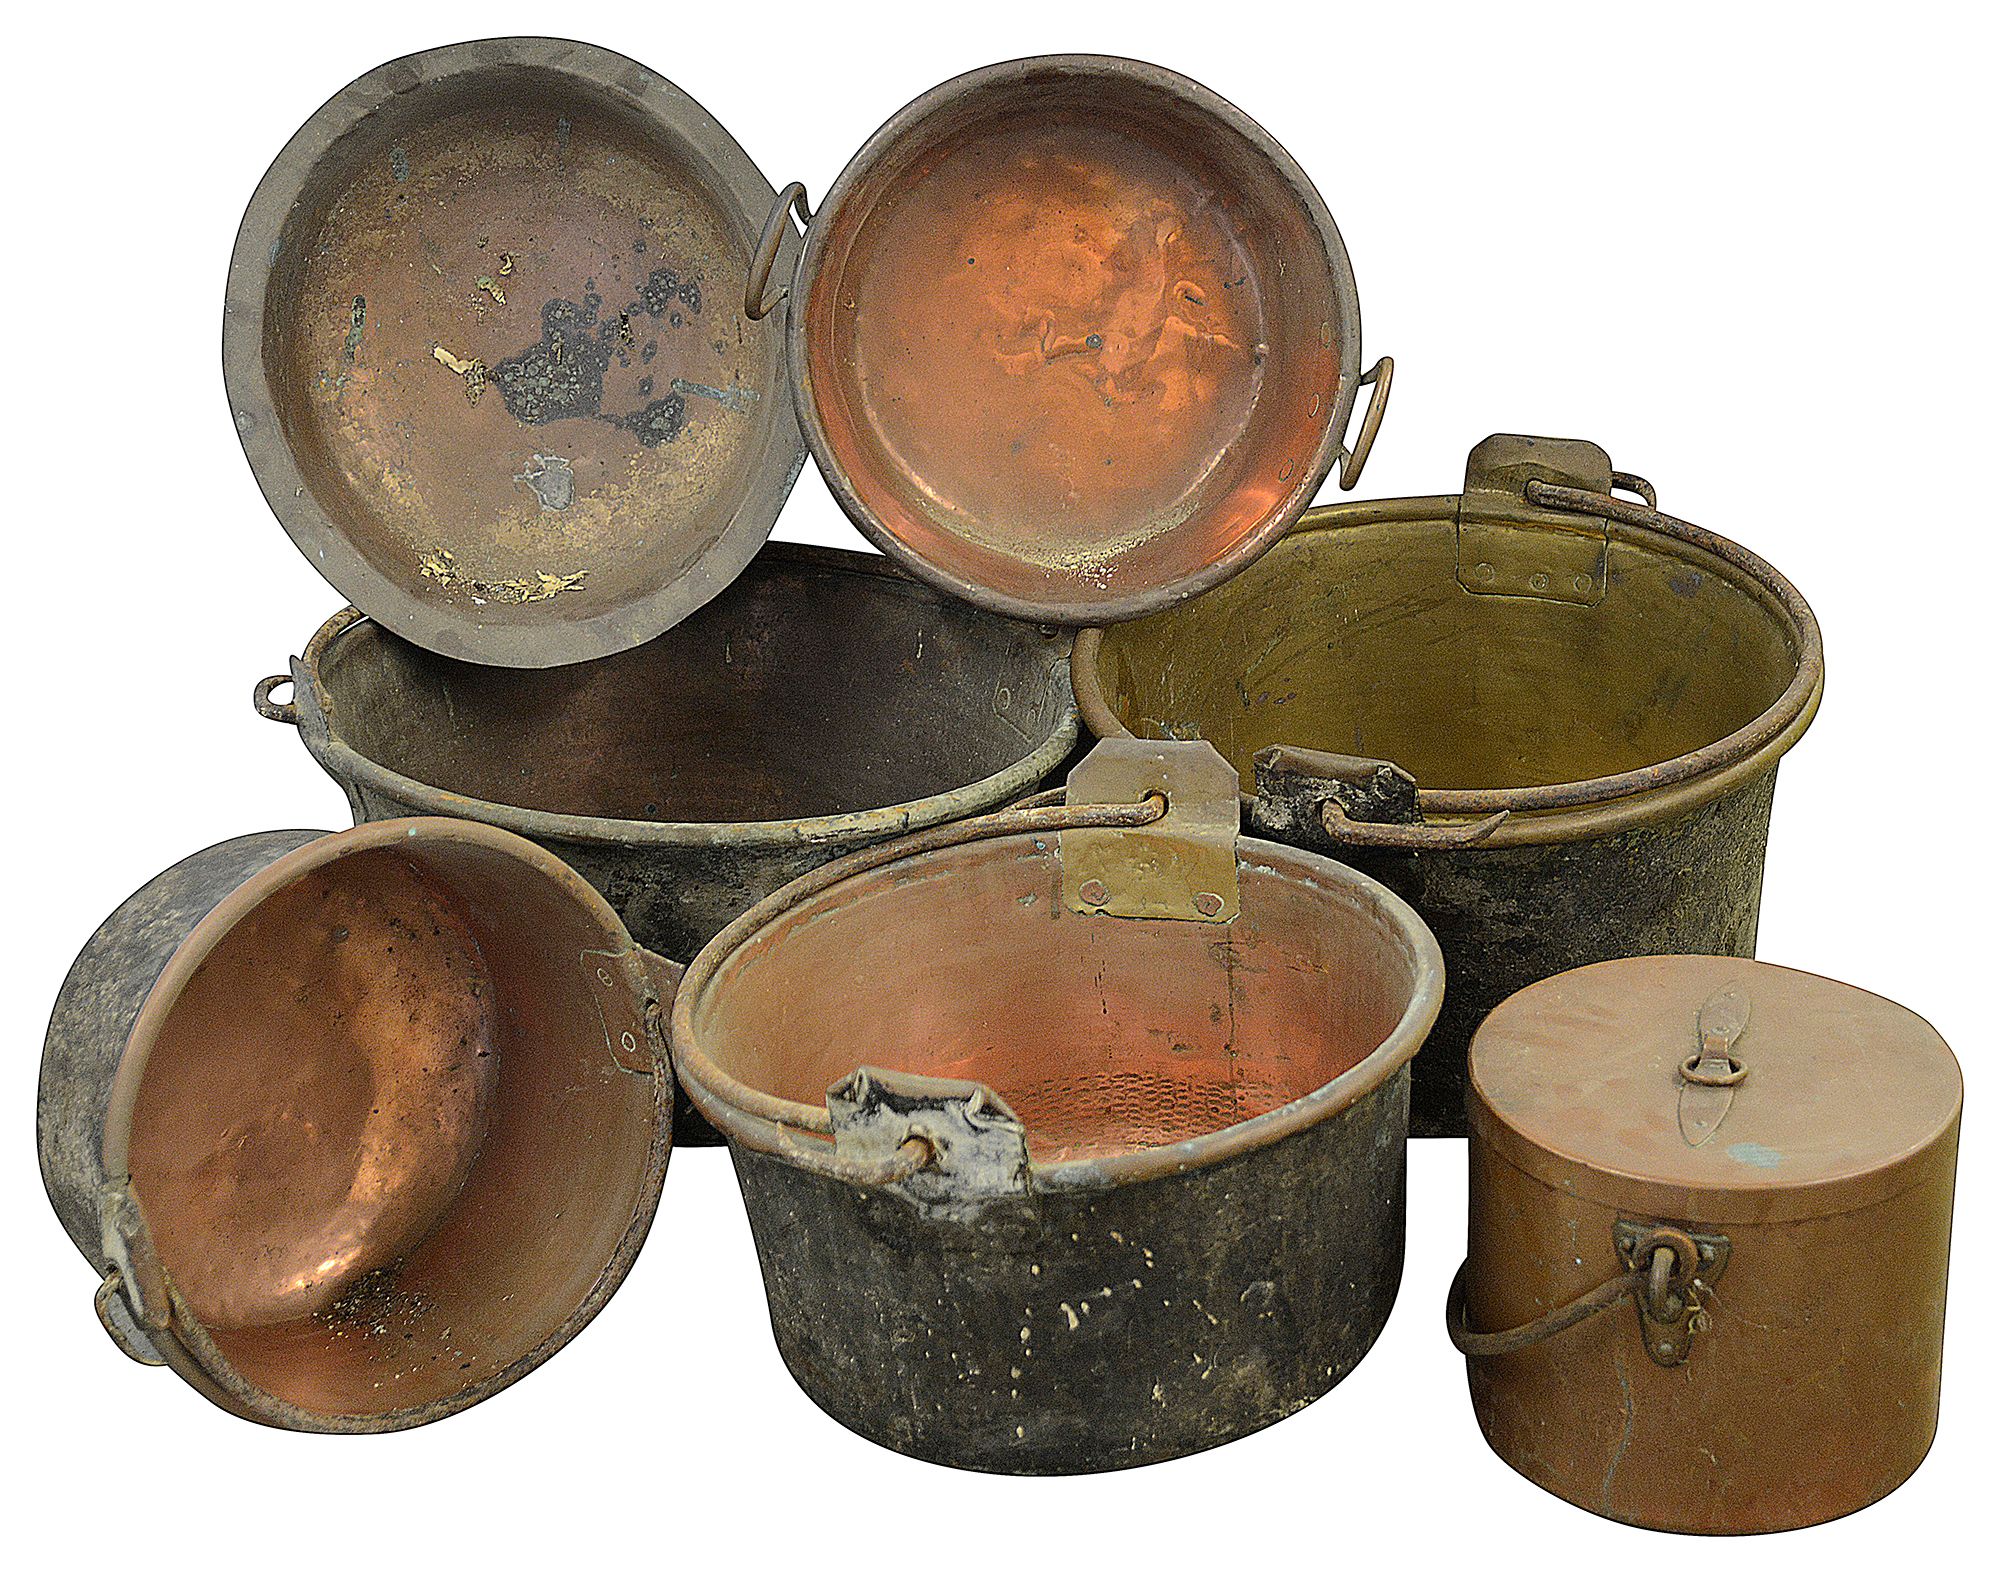 A group of six French copper kitchenware items